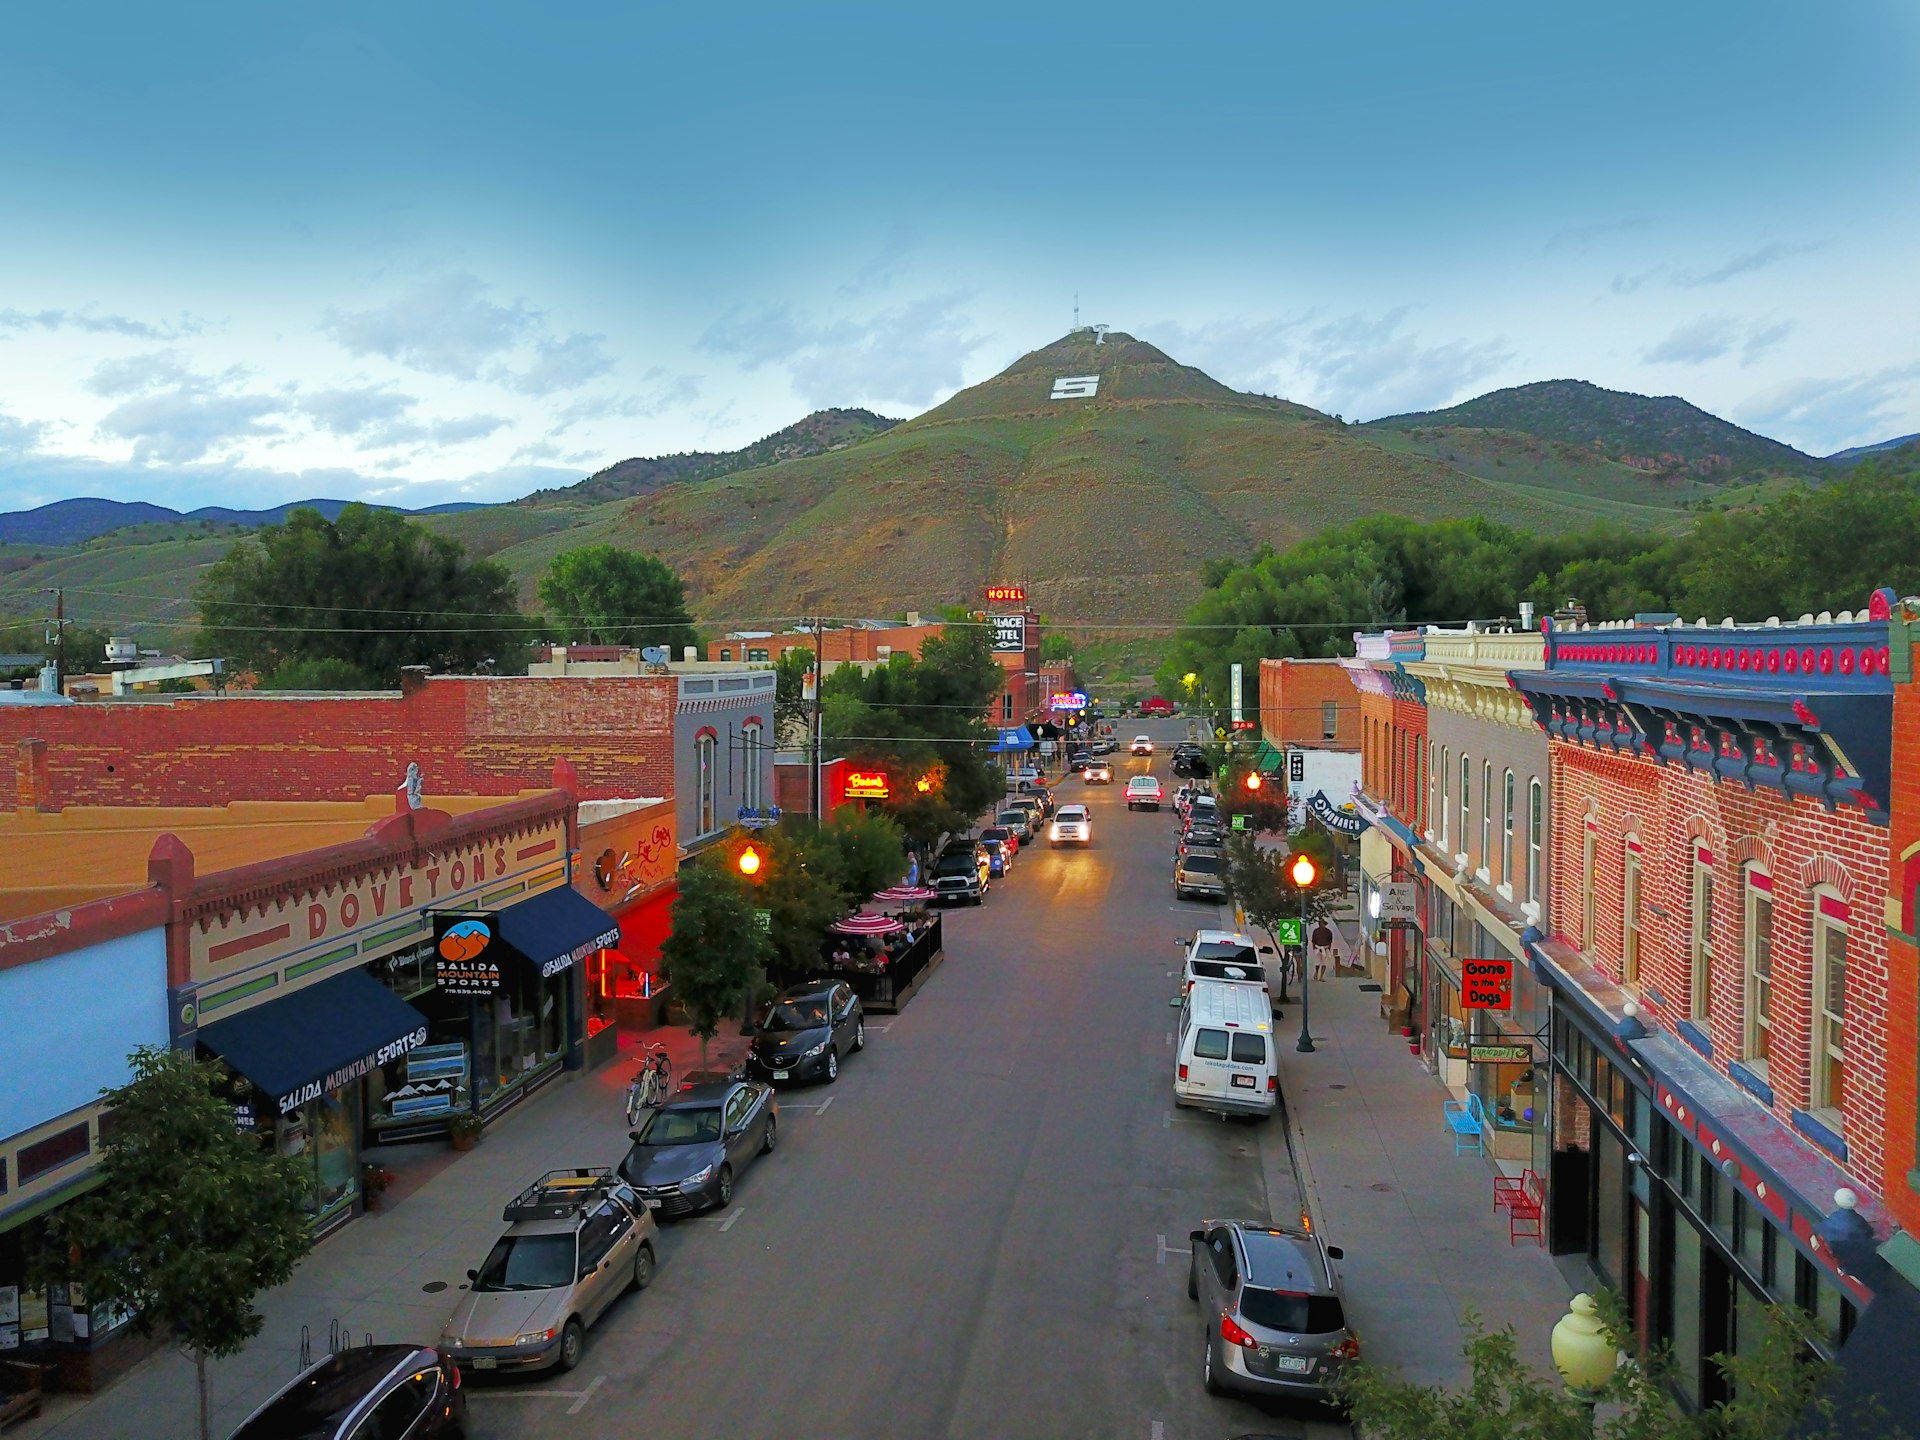 An aerial view of downtown Salida, Colorado, with colorful buildings lining the streets and a mountain with a white S on its slope in the background